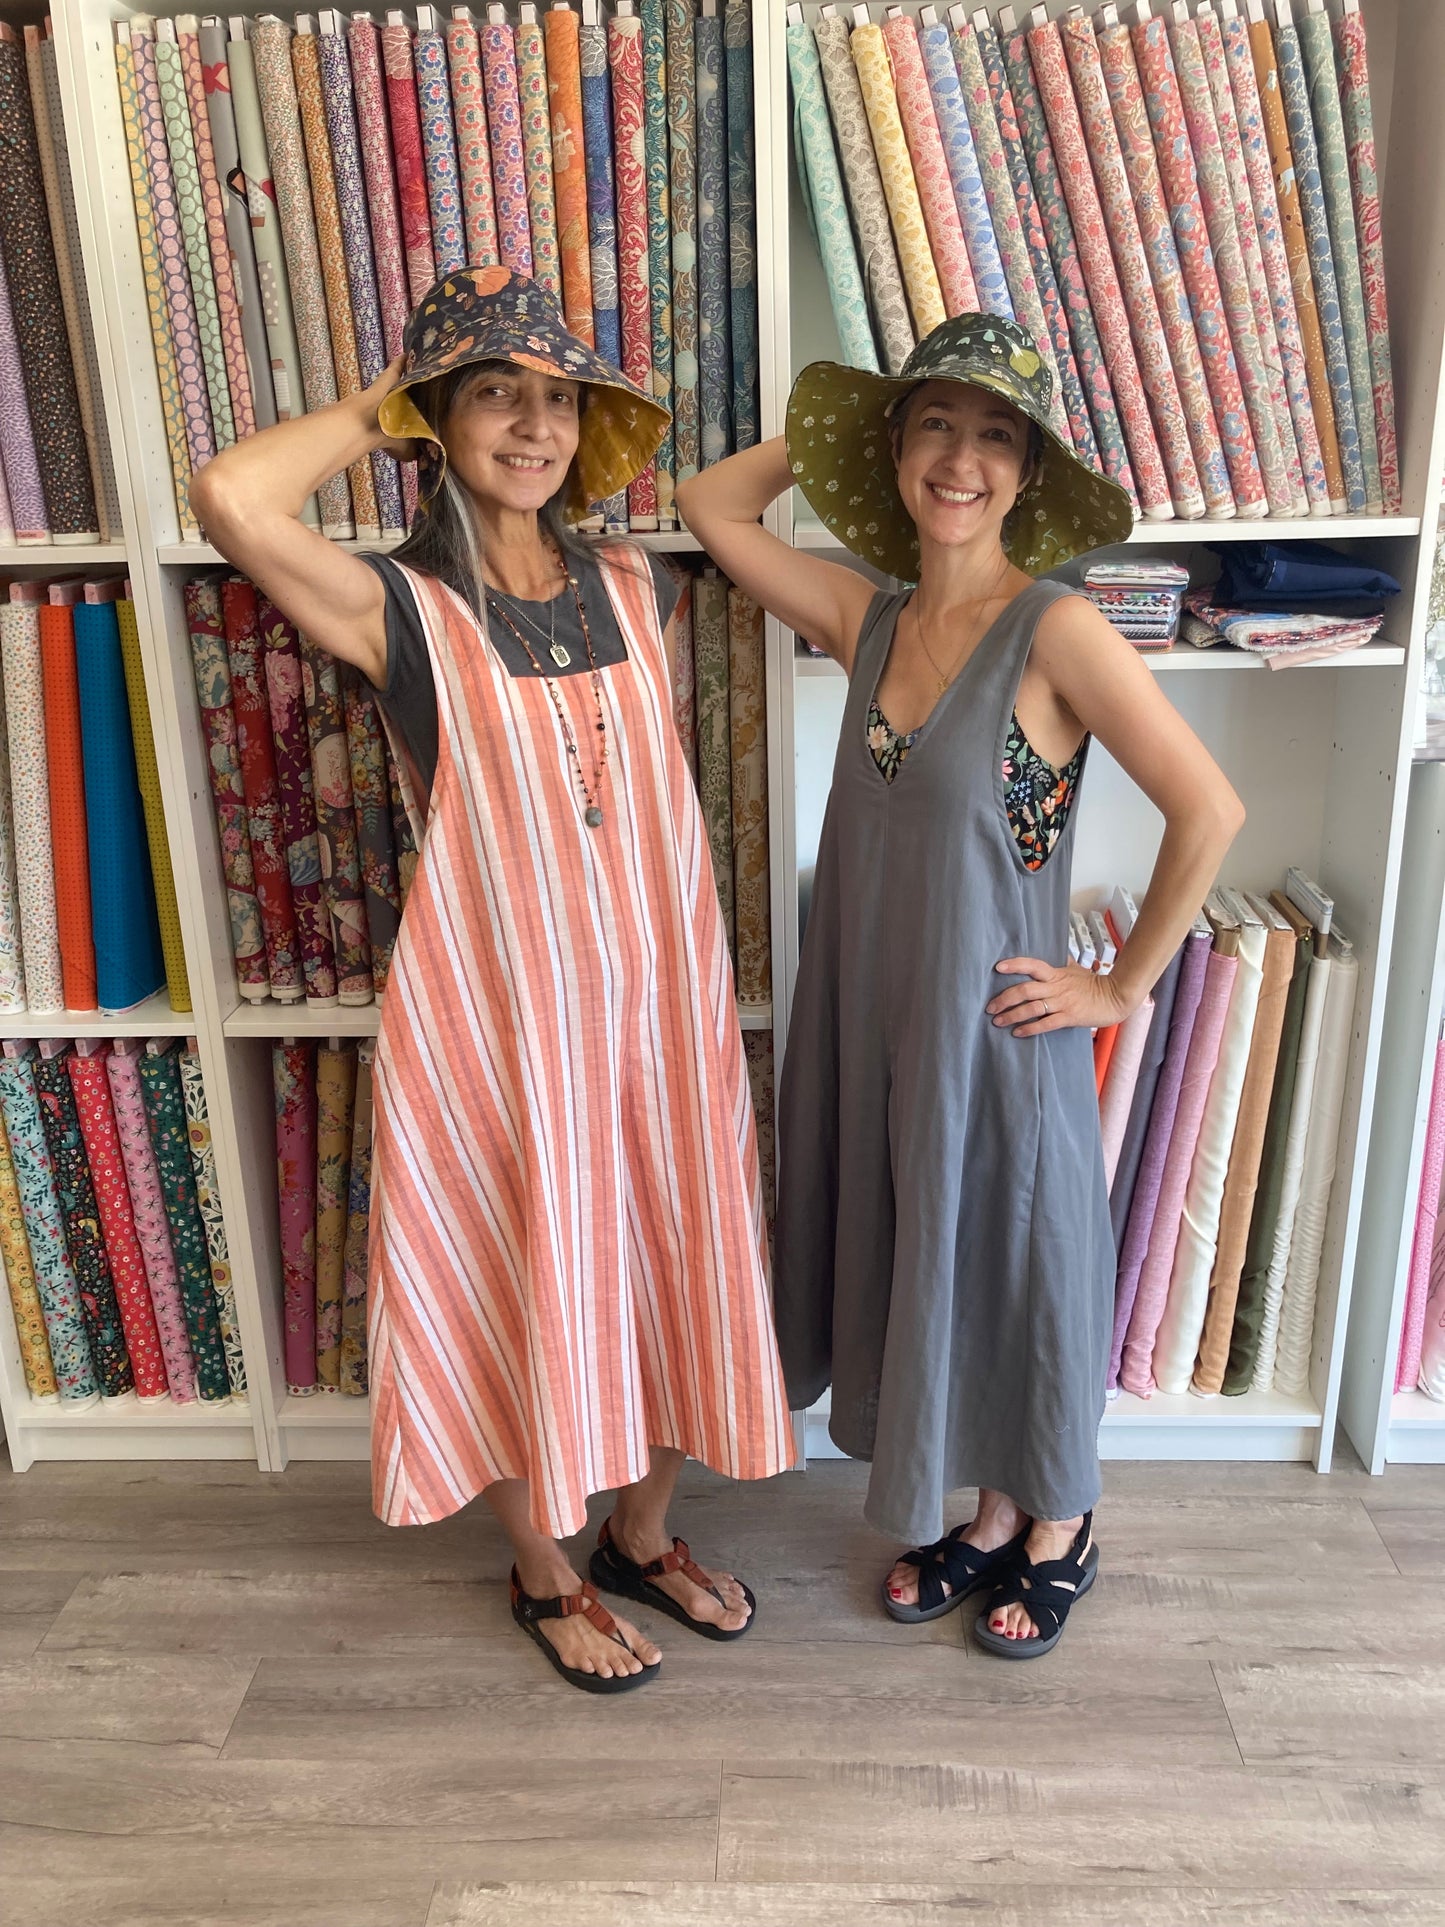 Darcy & Lana wear jumpsuits and hats